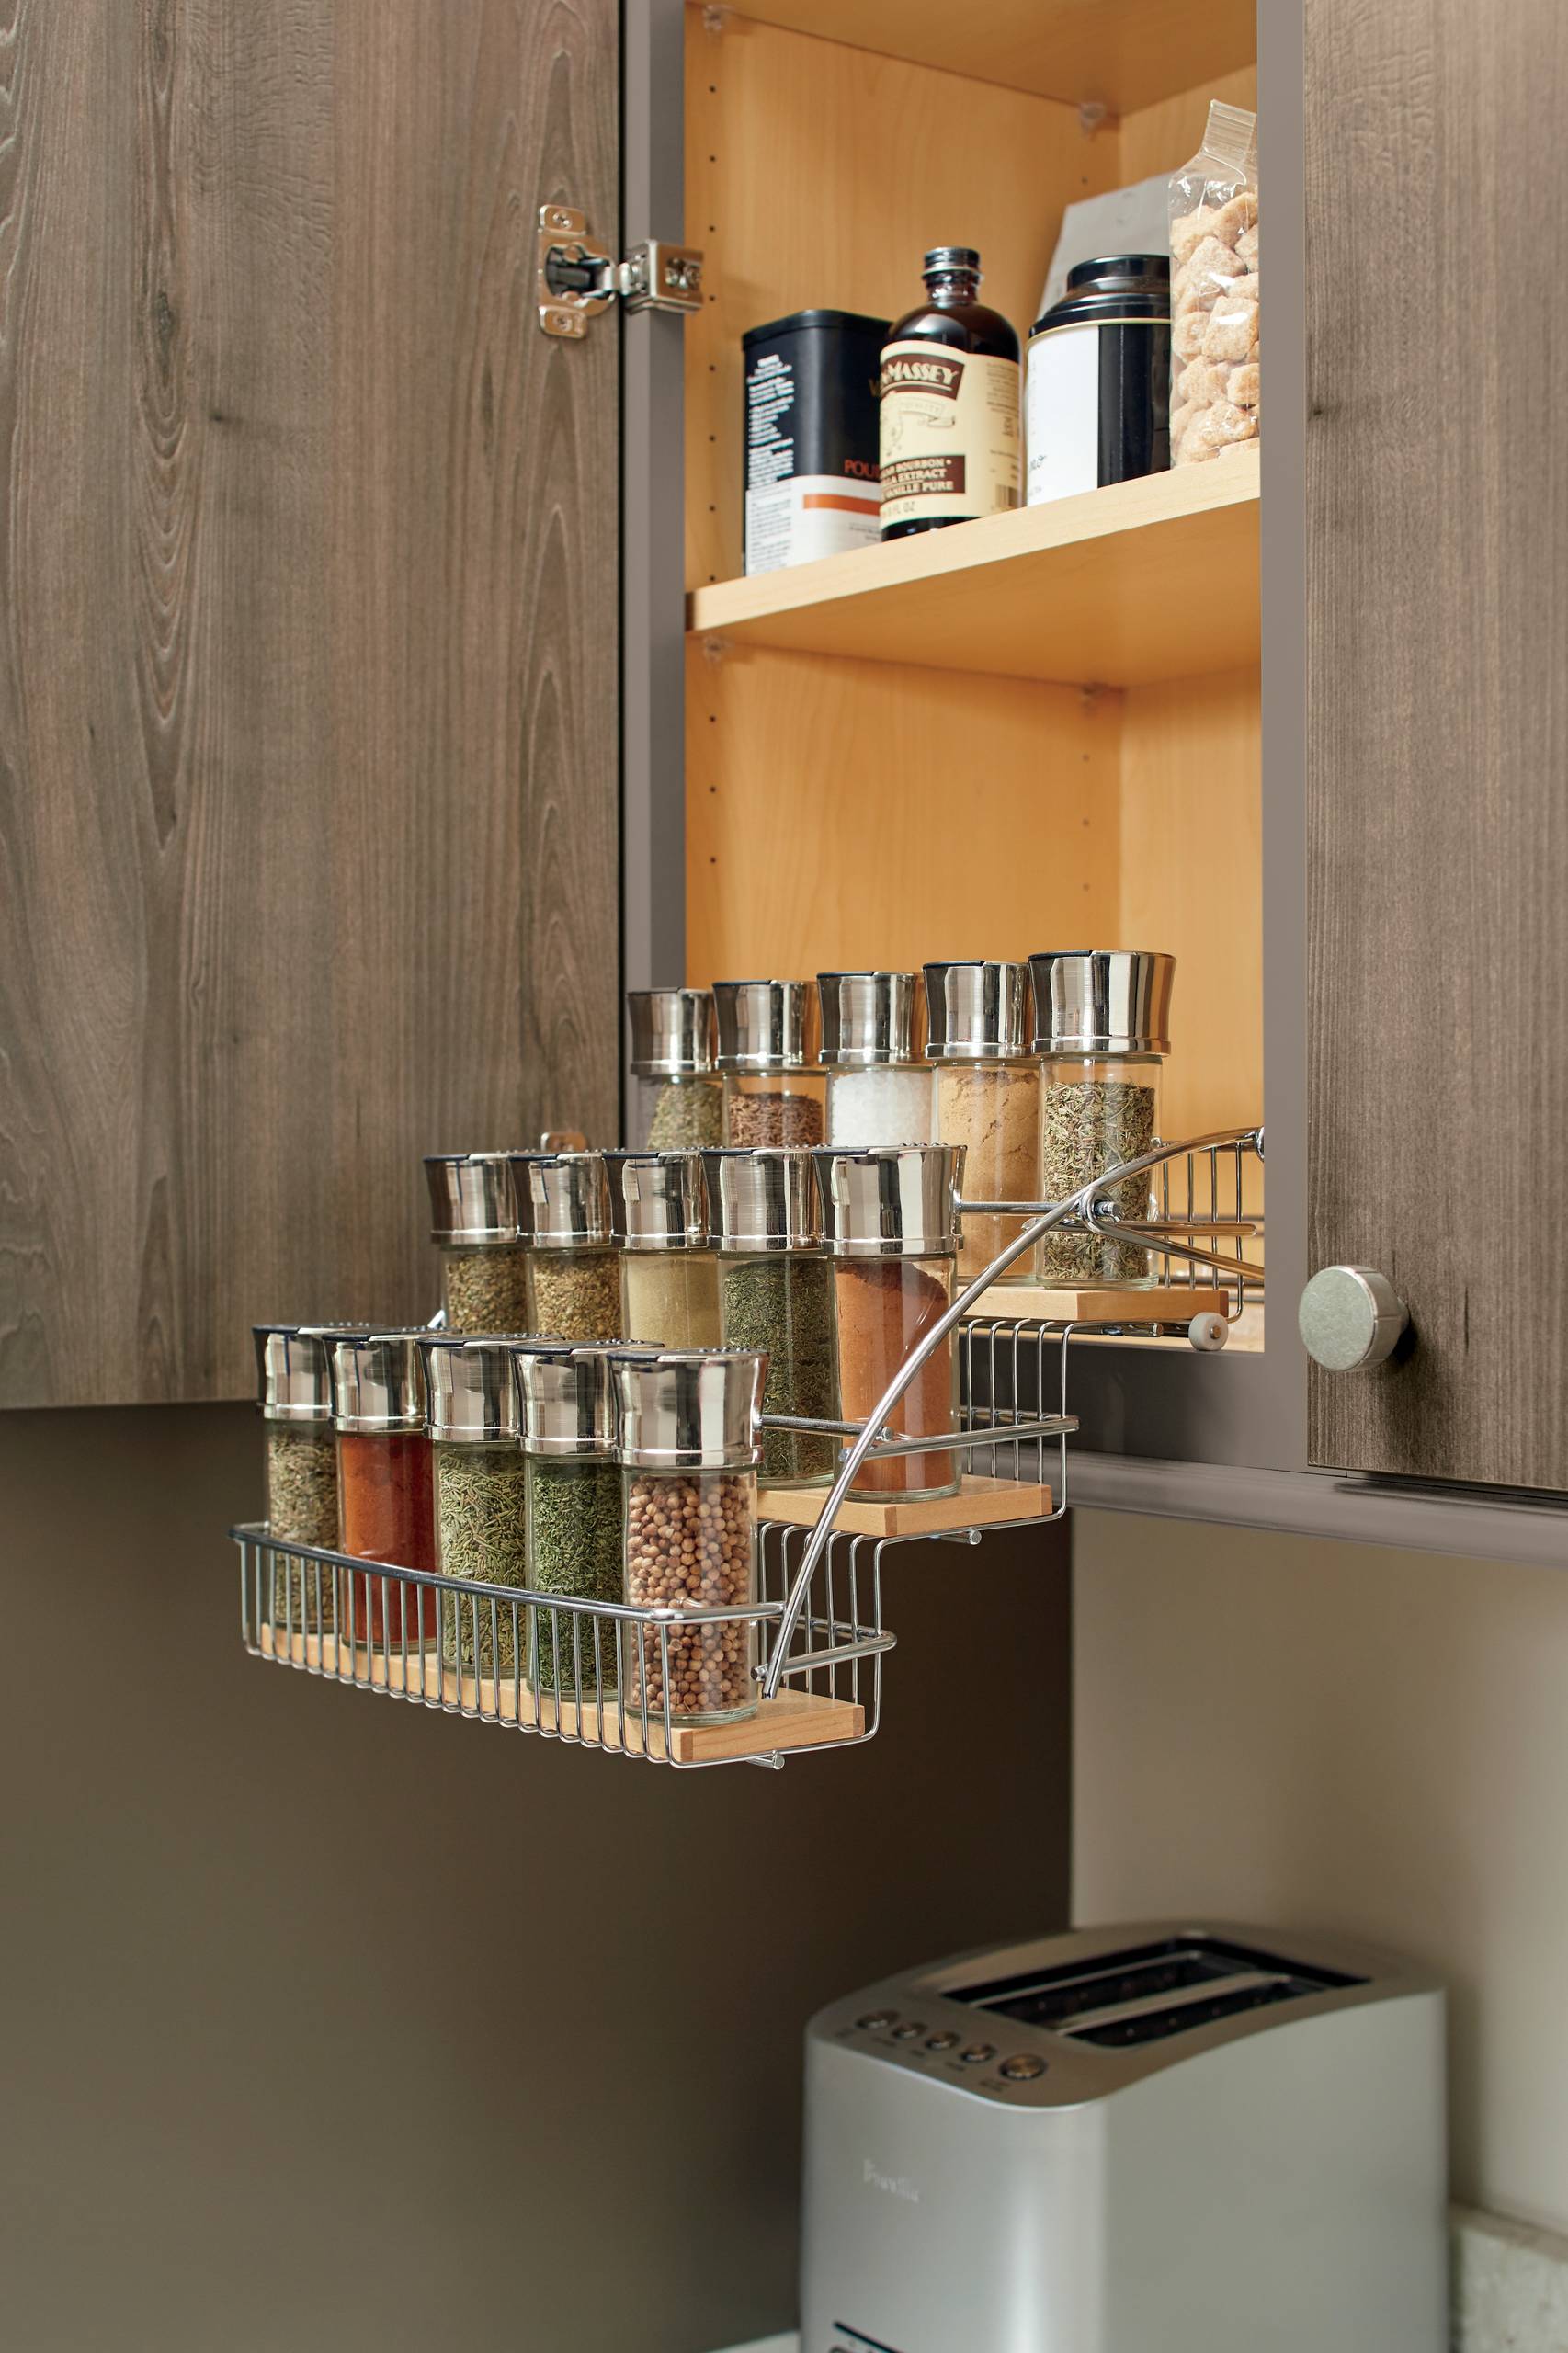 https://st.hzcdn.com/simgs/pictures/kitchens/pull-down-spice-rack-the-home-depot-img~0221fb7909555178_14-3238-1-5789950.jpg